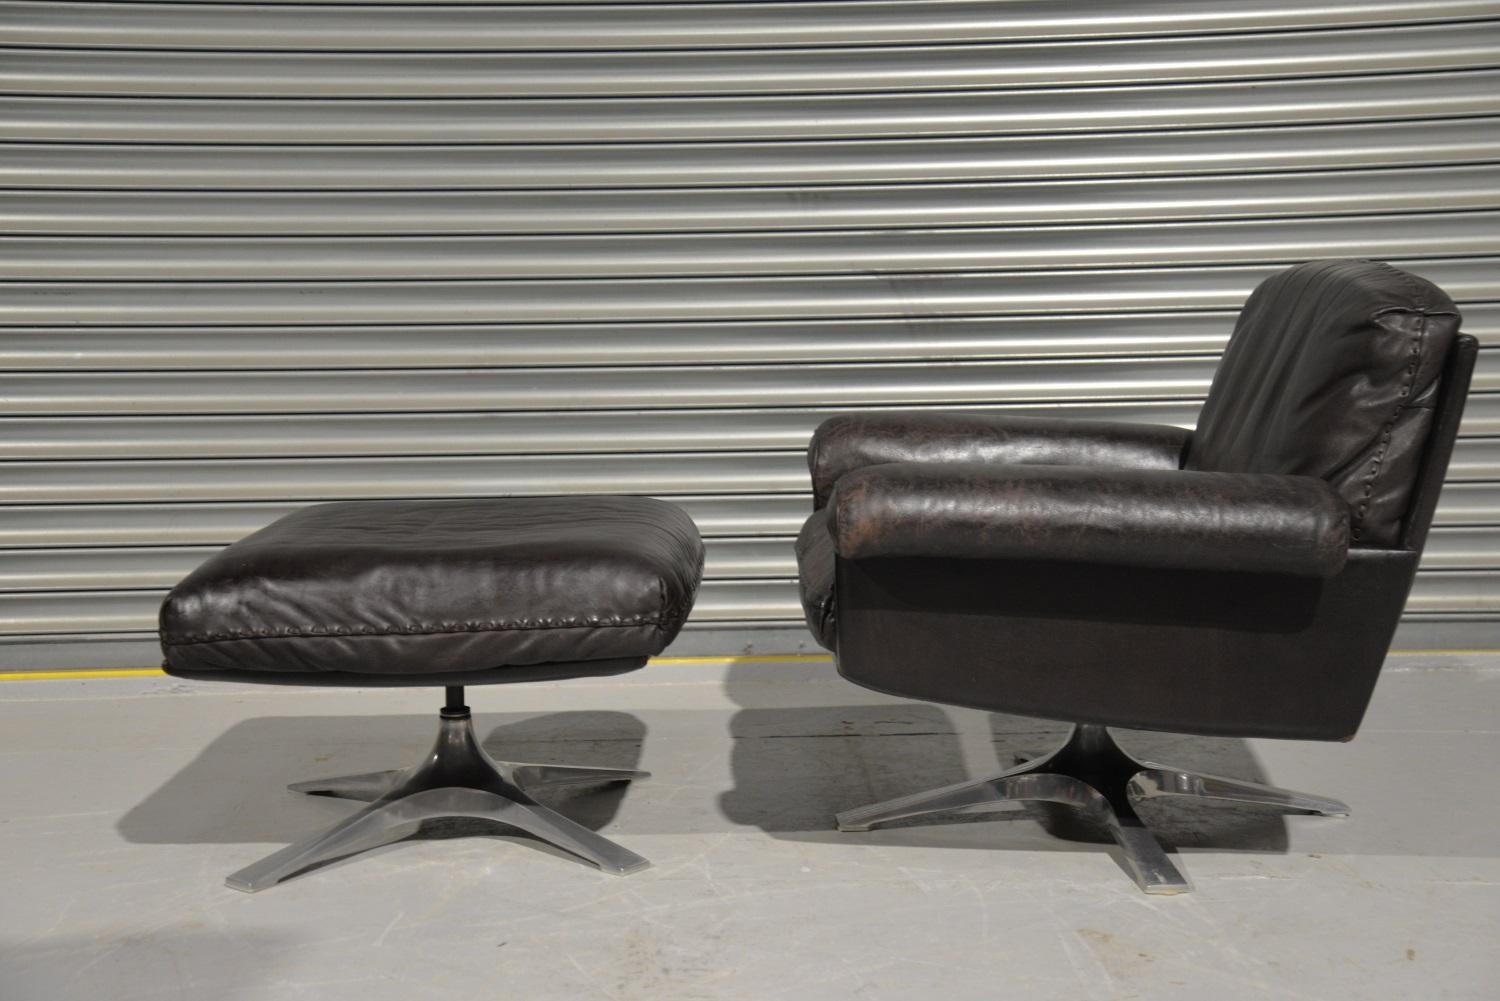 Discounted airfreight for our International customers (from 2 weeks door to door)
 
We are delighted to bring to you a vintage De Sede DS 31 swivel lounge armchair with ottoman. Hand built in the 1970s by De Sede craftsman in Switzerland. This